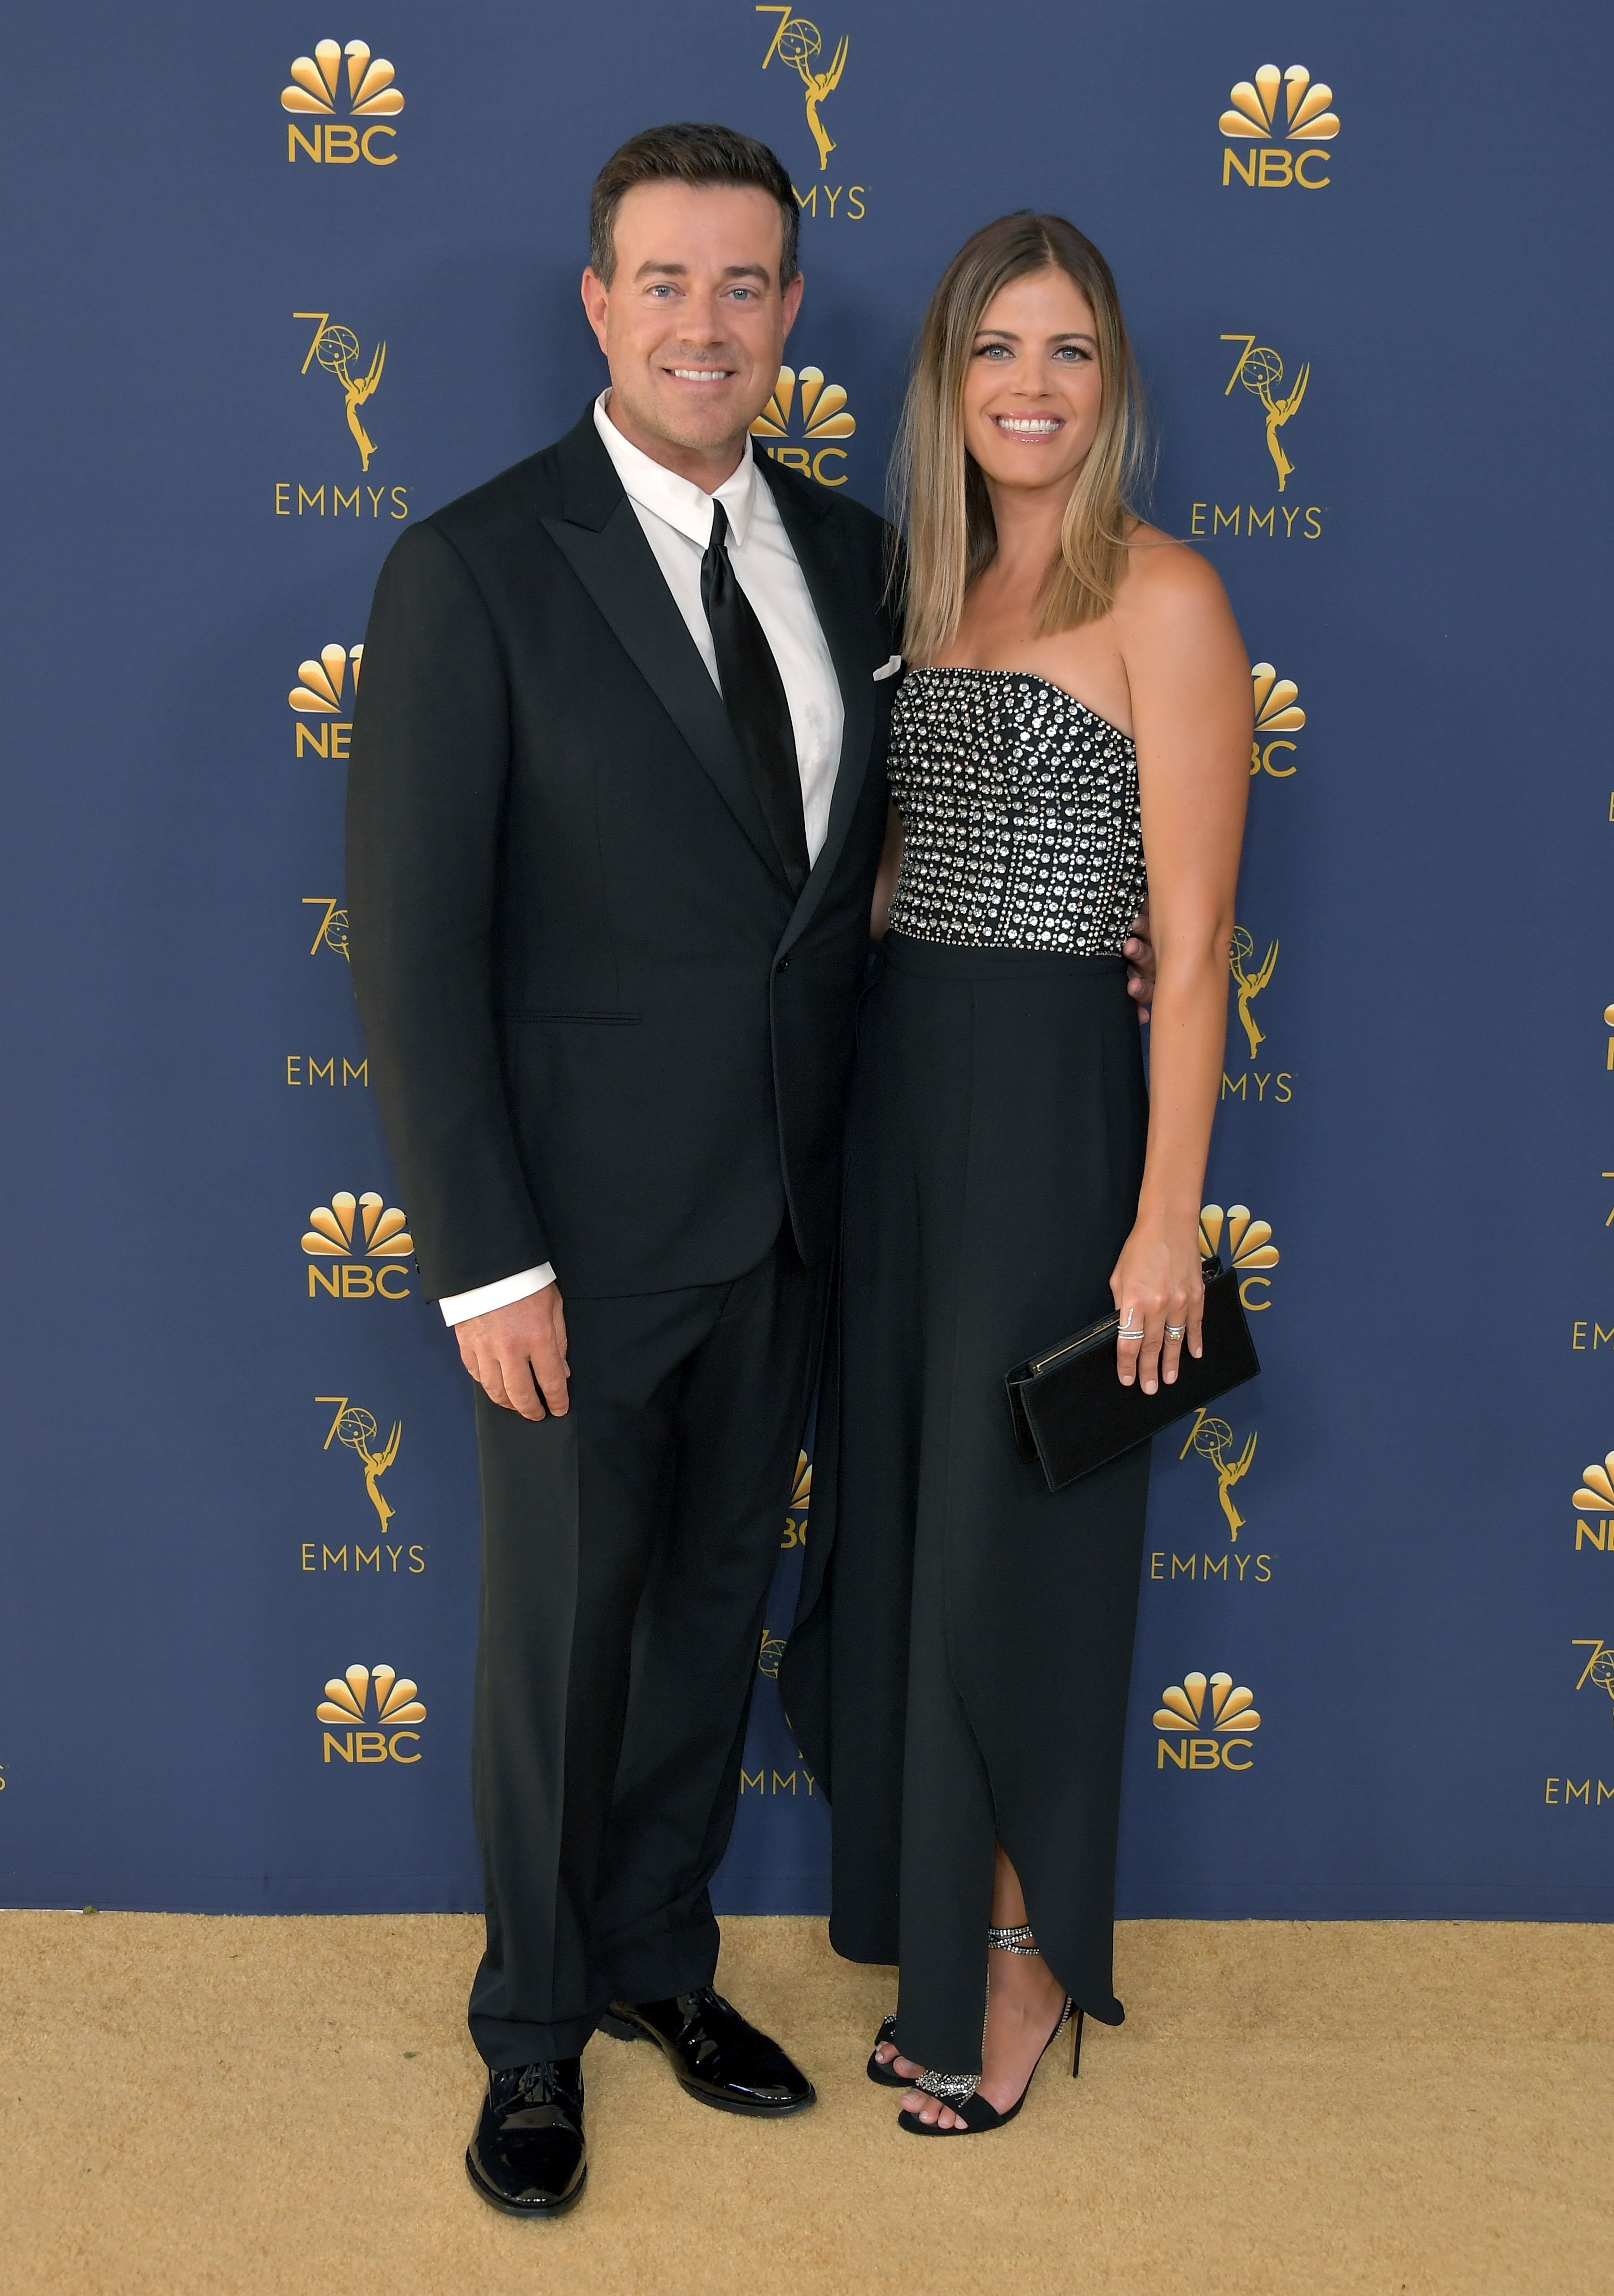 Carson and Siri Daly at the 70th Emmy Awards on September 17, 2018, in Los Angeles, California | Photo: Neilson Barnard/Getty Images